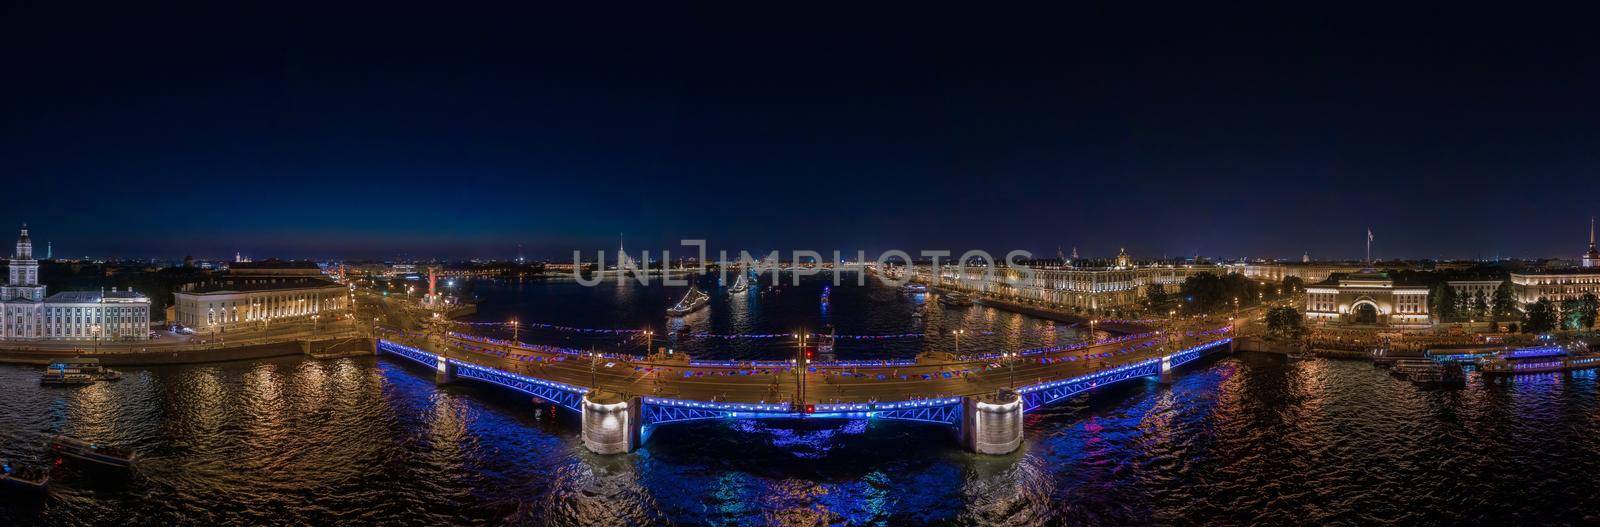 night landscape of festivities on the day of the Russian Navy, picturesque night illumination of buildings, warships and drawbridges, many people walk in the absence of automobile traffic. High quality photo